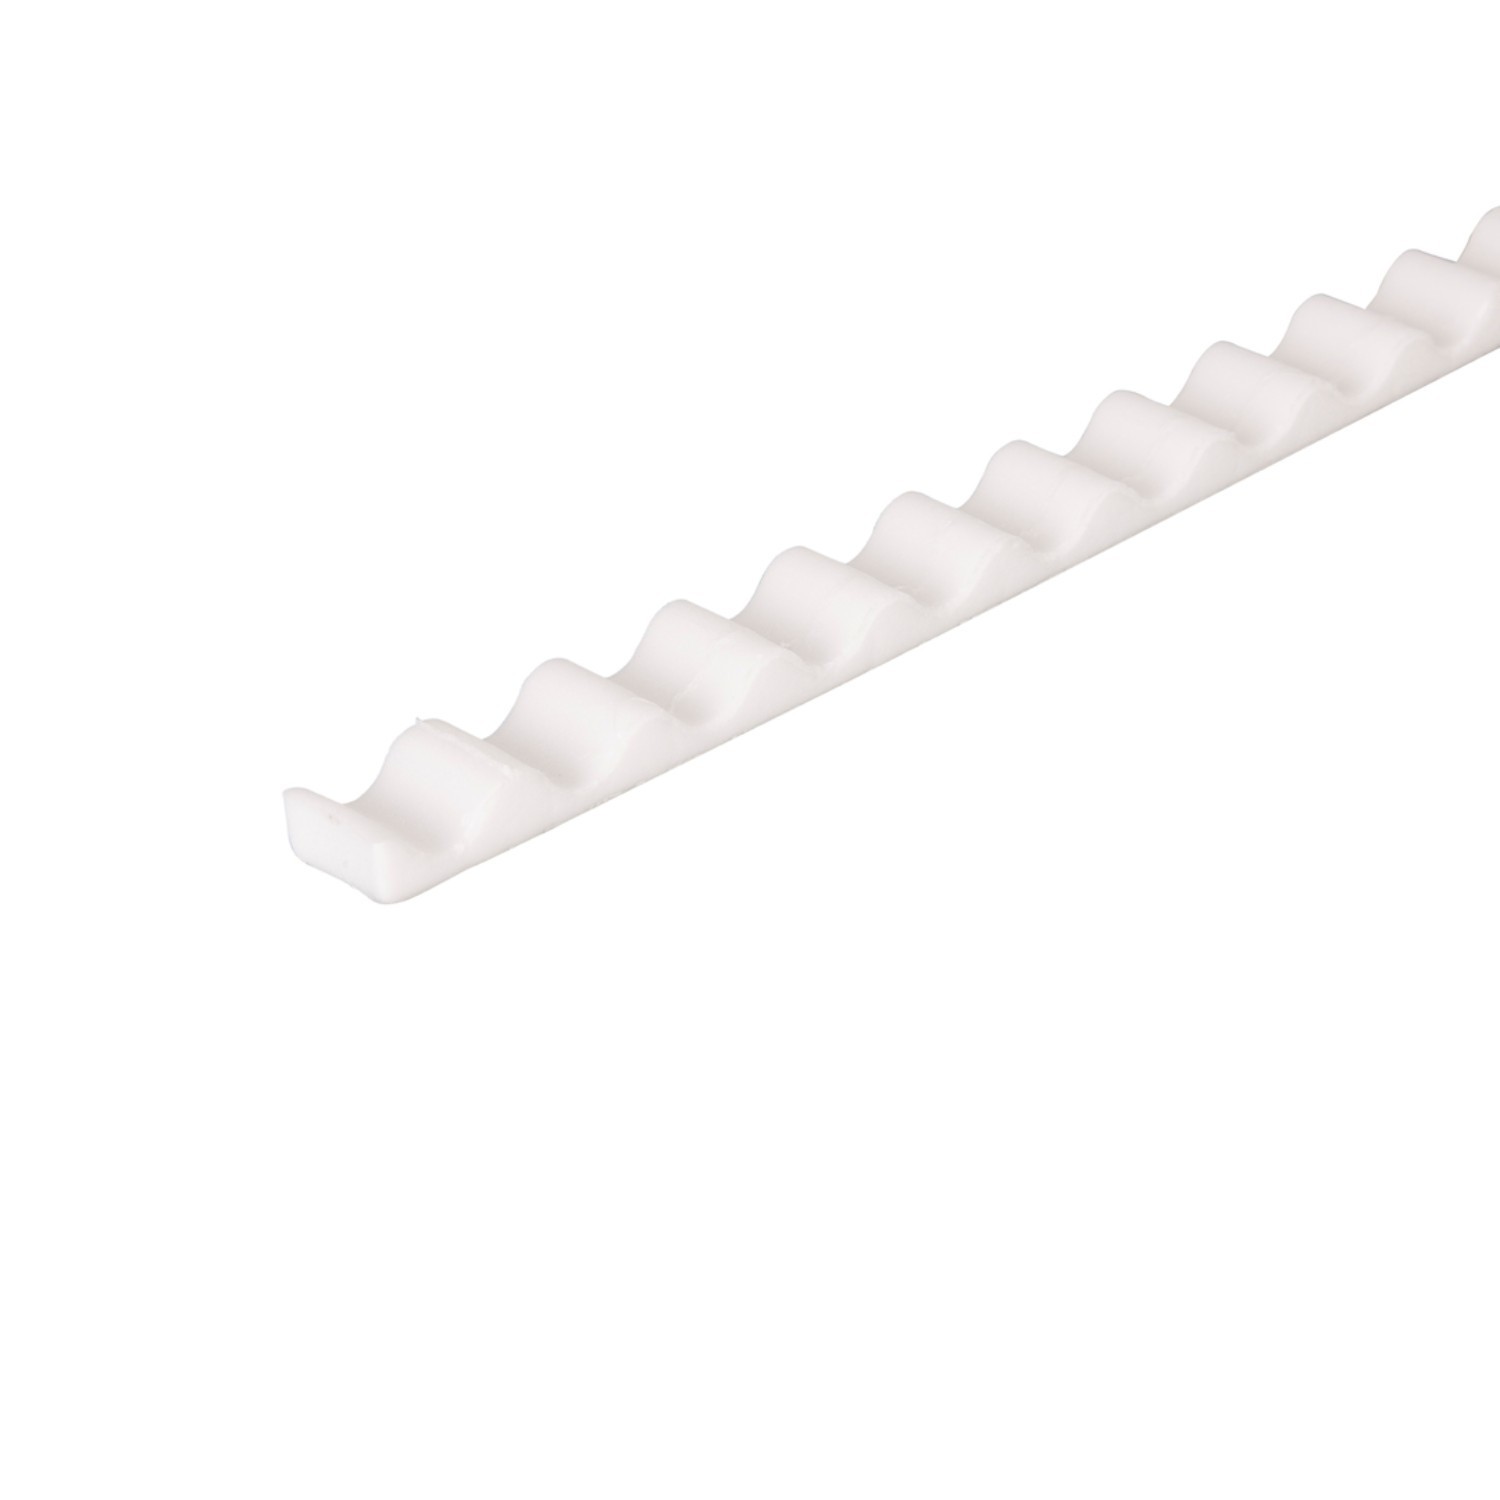 Corolux - Mini Corrugated PVC Roof Eaves Filler Pack of 6 (690mm per Piece)